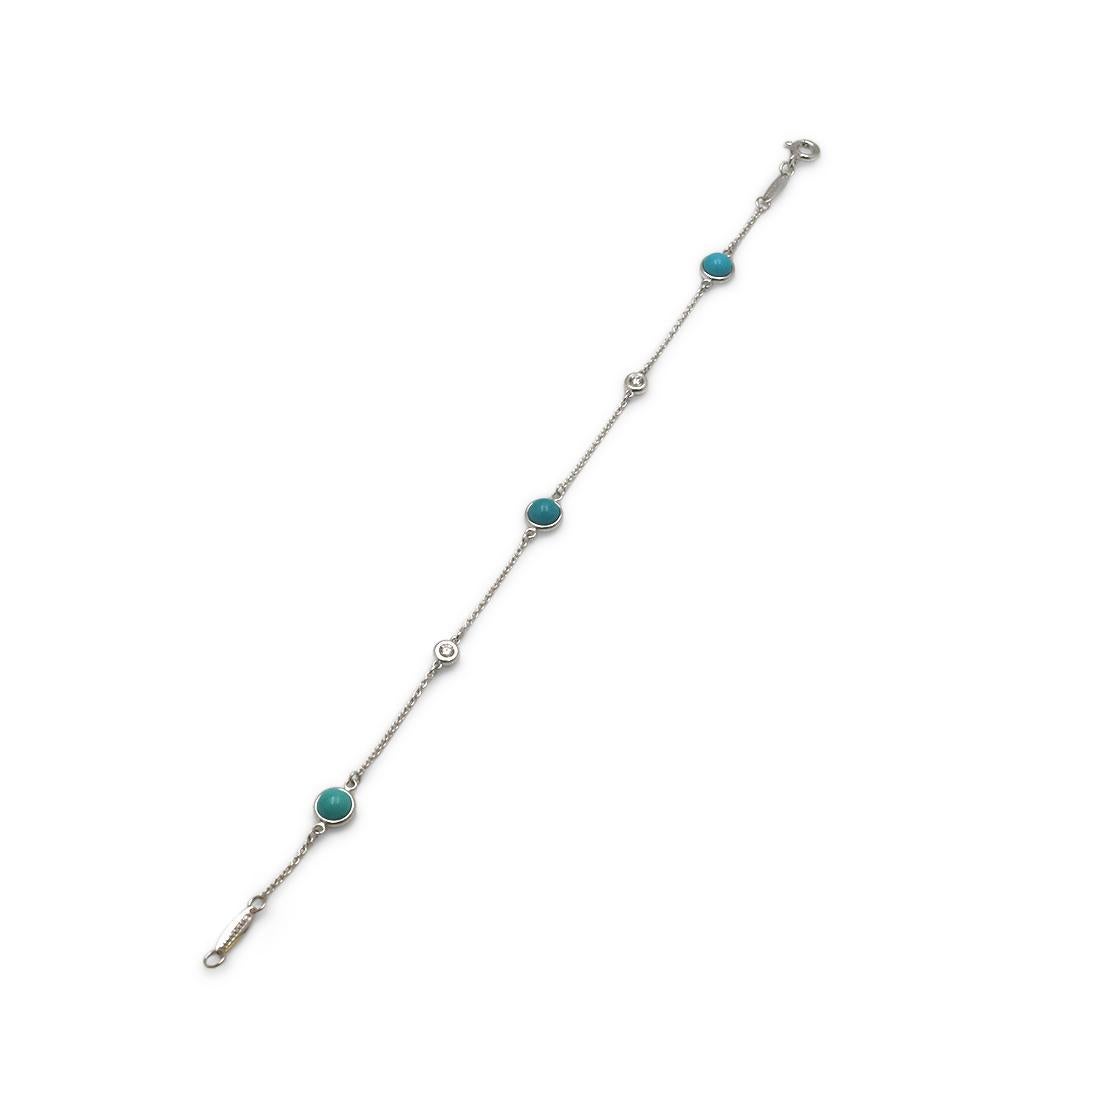 Authentic Elsa Peretti For Tiffany & Co. Color By The Yard bracelet crafted in sterling silver. This bracelet is set with alternating turquoise cabochons and round brilliant diamonds with an estimated .10 total carats weight. Fits up to a 7 inch